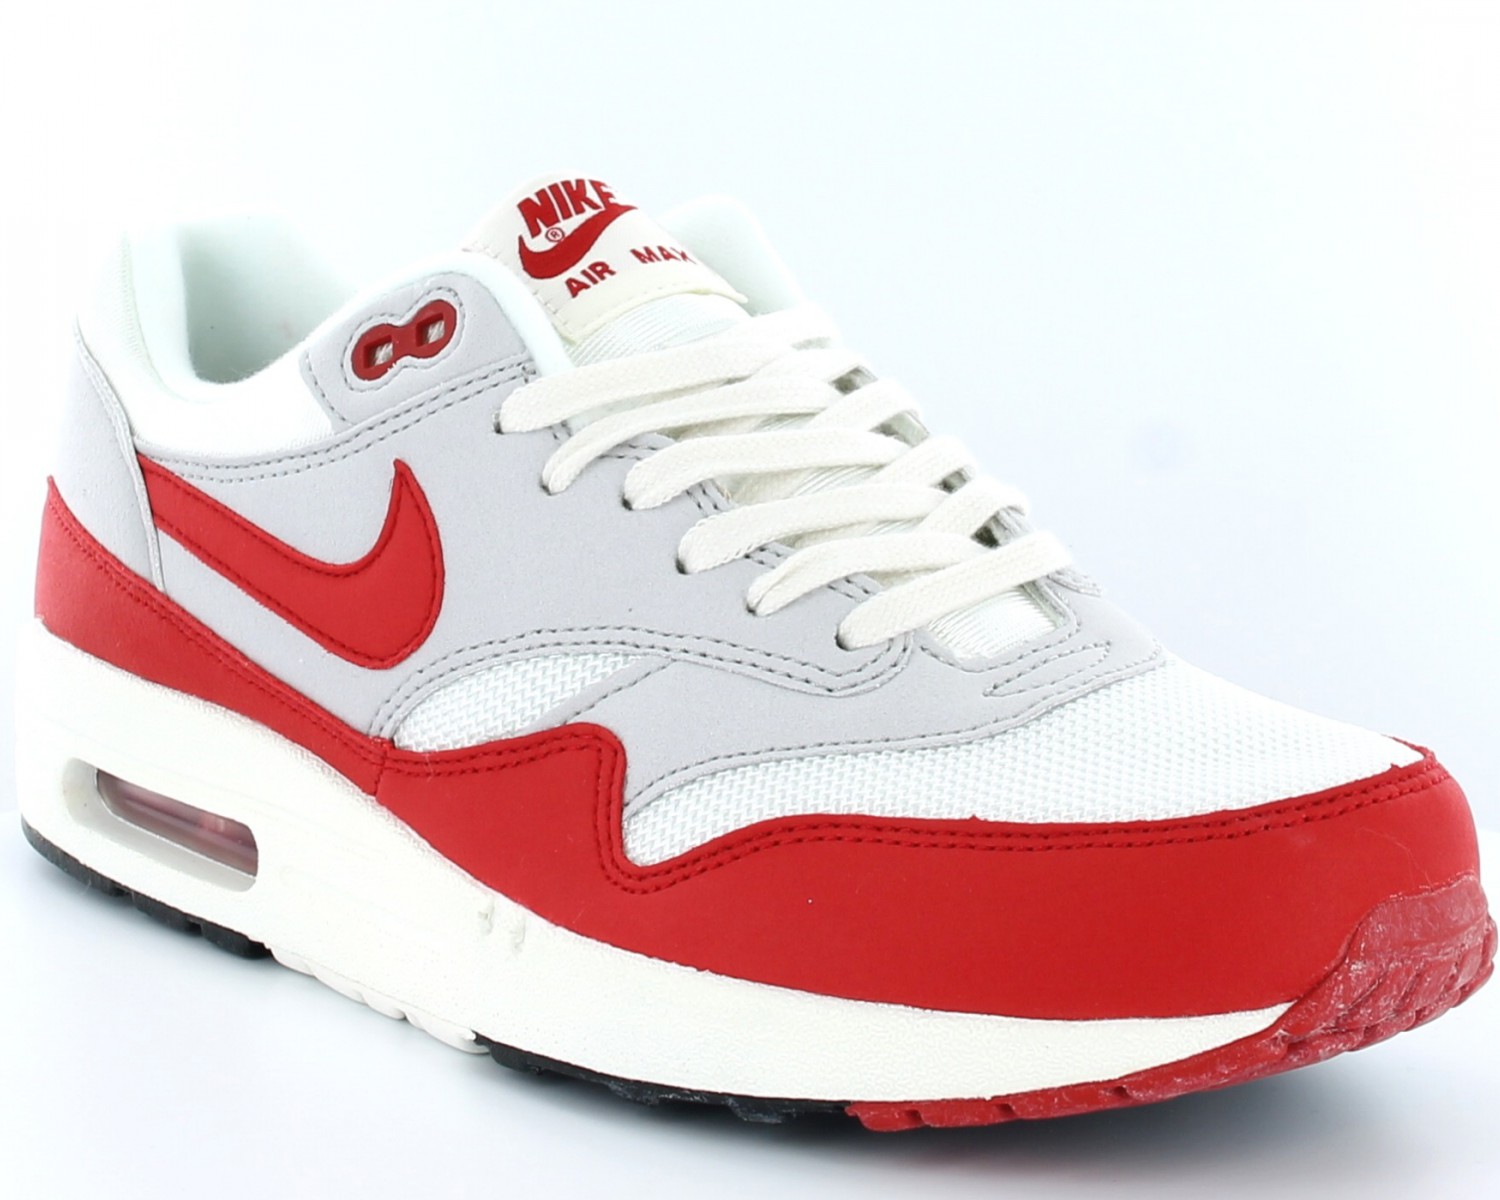 Purchase > nike air max 1 rouge et blanche, Up to 60% OFF